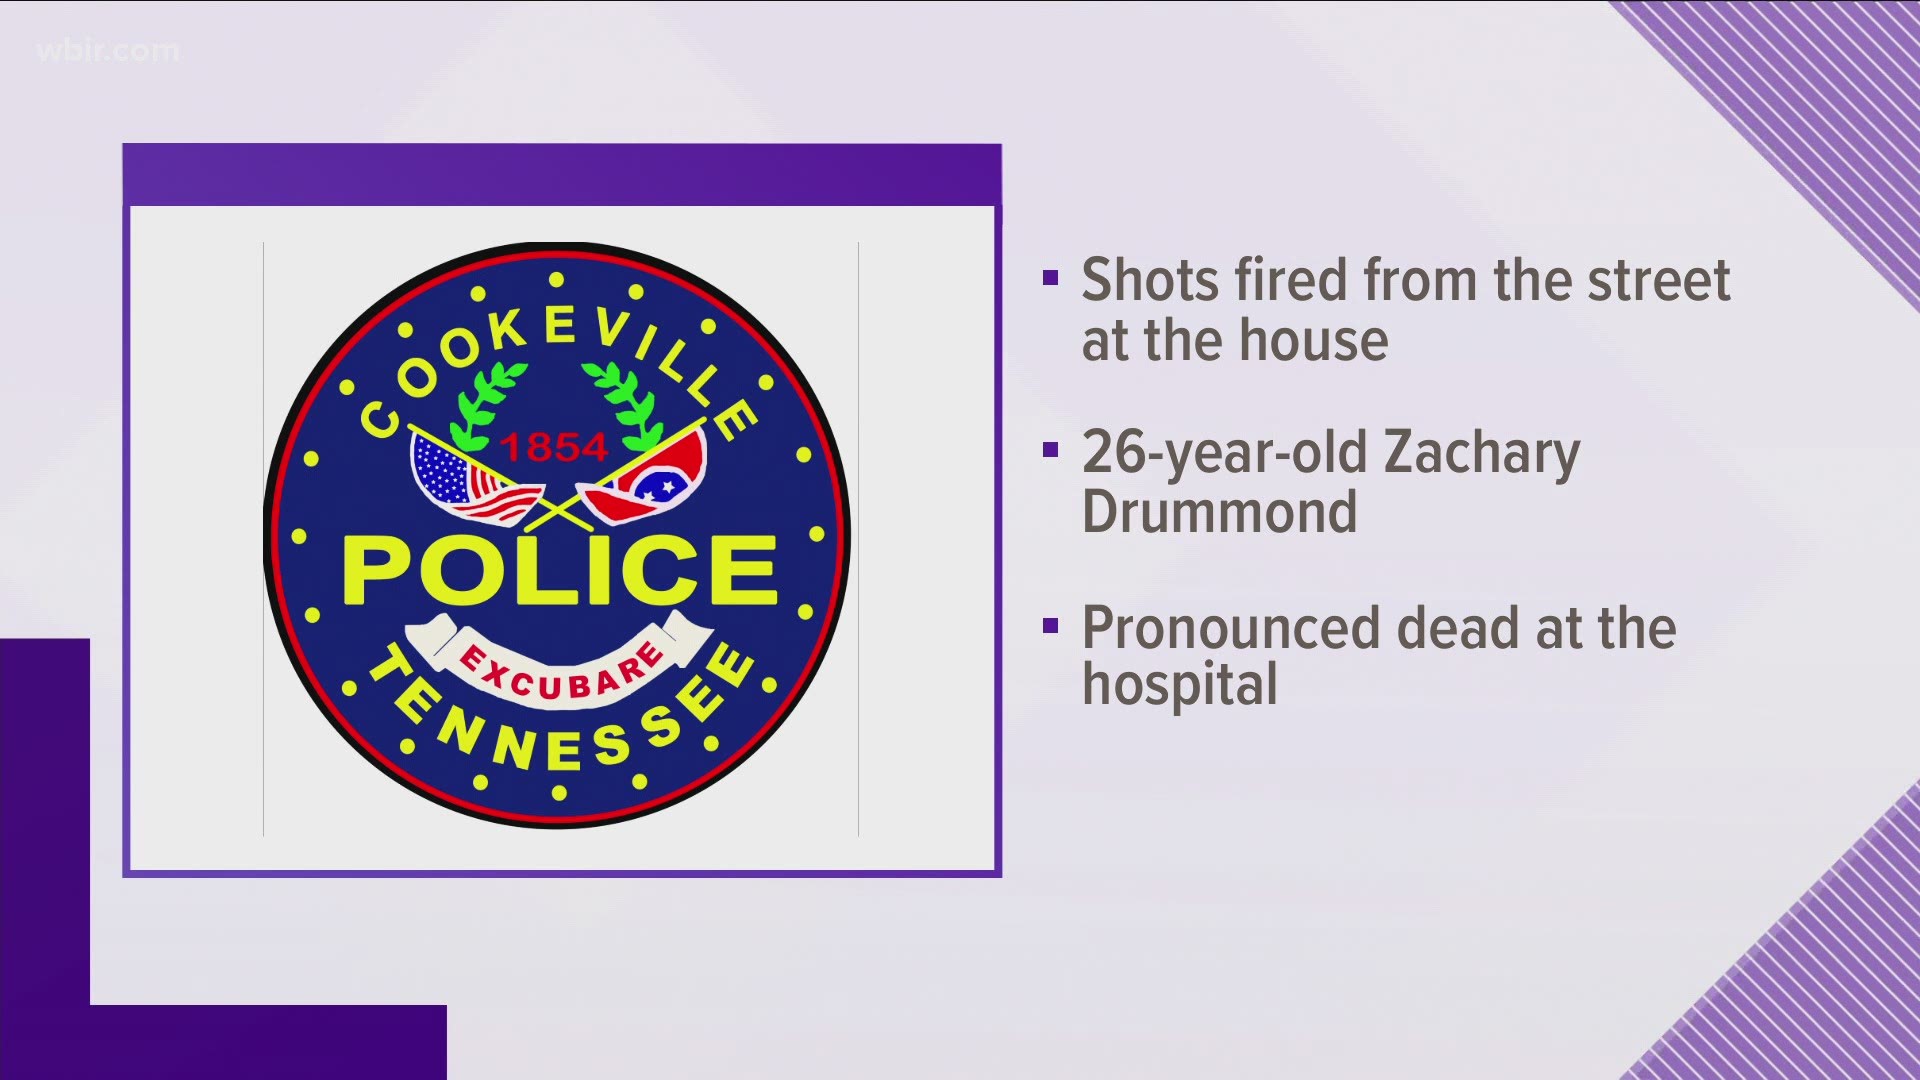 Police said 26-year-old Zachary Drummond was killed after someone fired shots at the house.